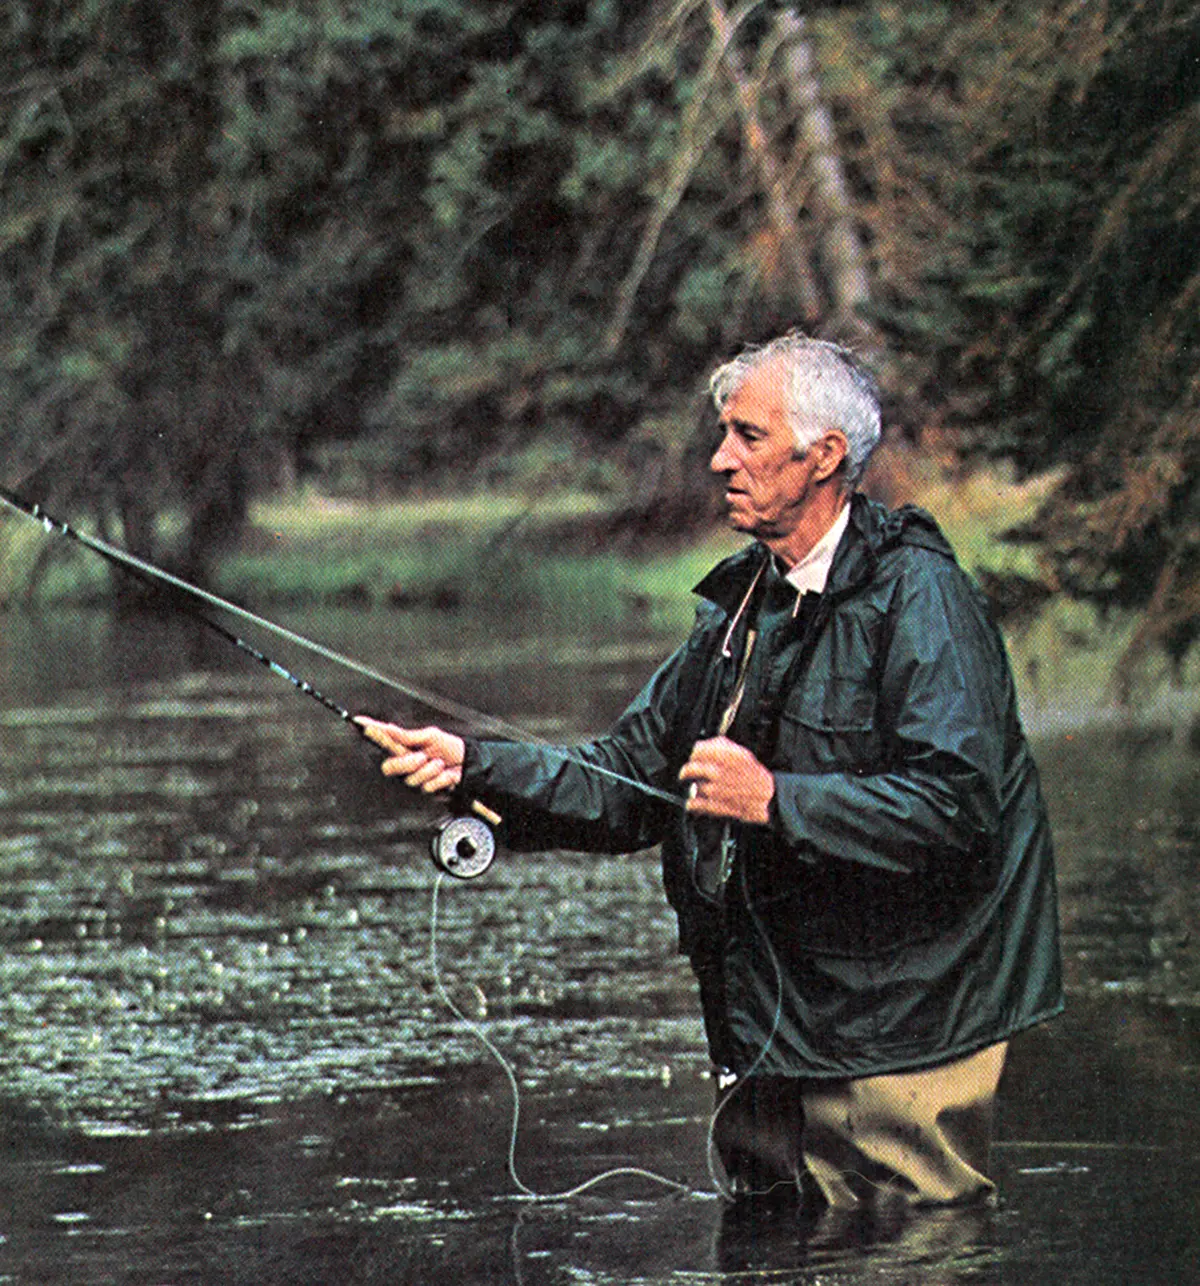 Fly Fisherman Throwback: The Wulff Flies - Fly Fisherman